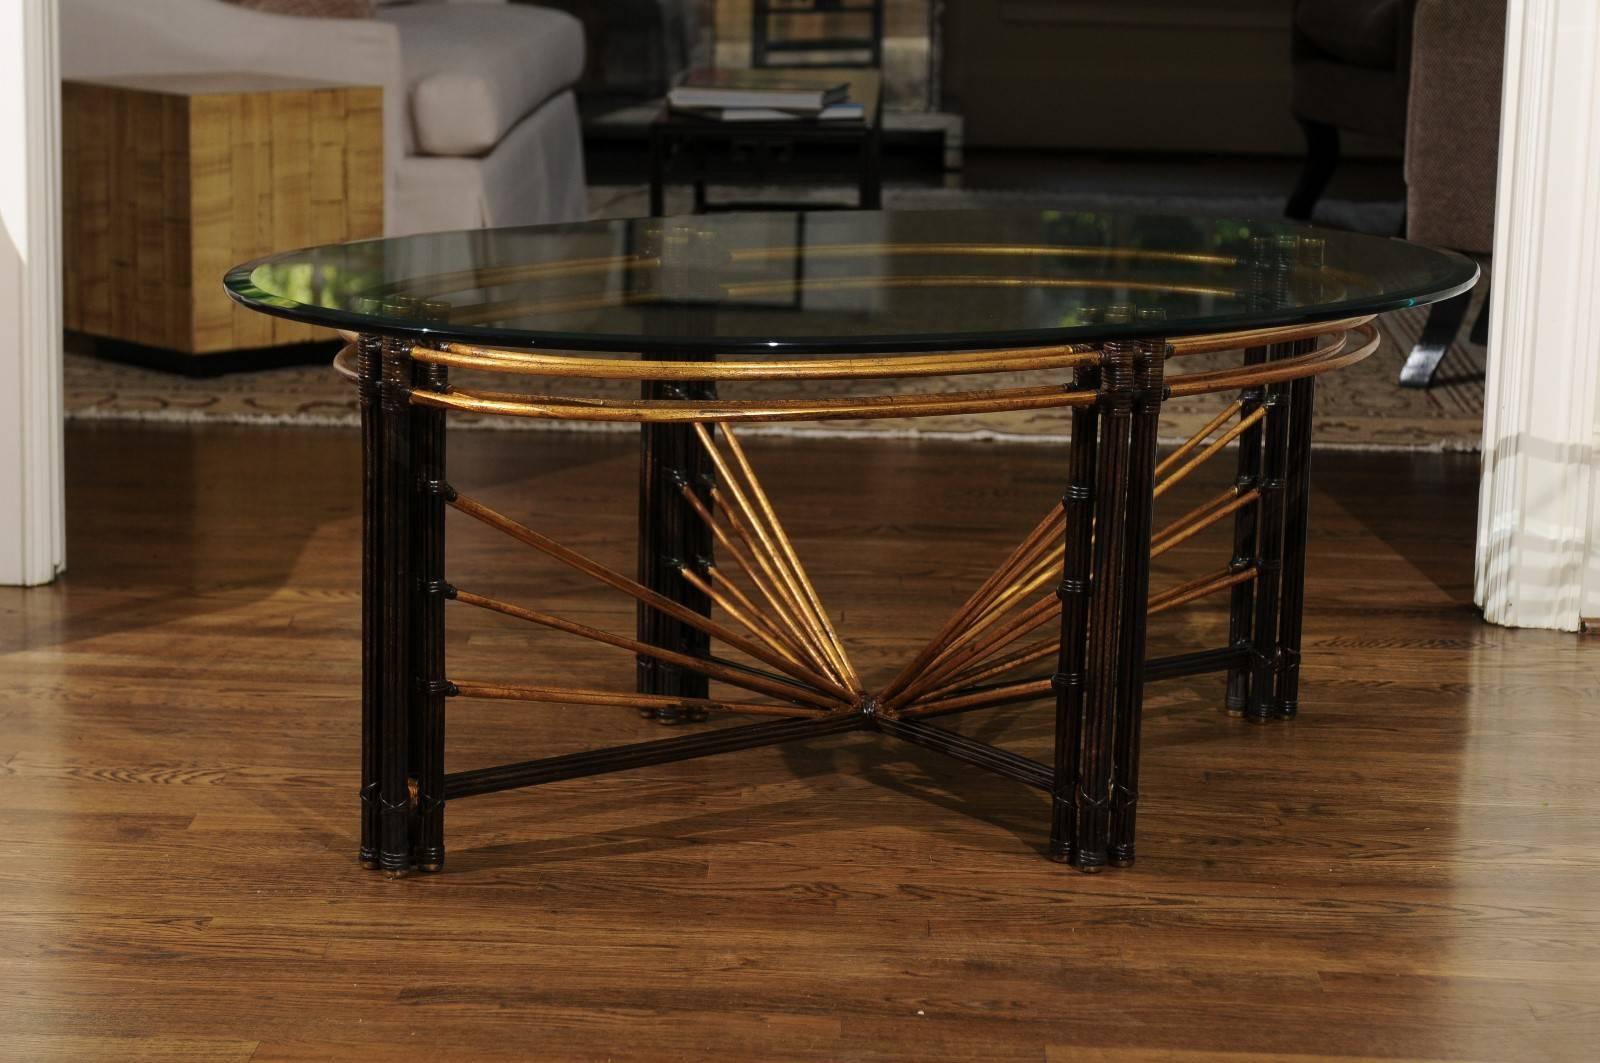 An amazingly beautiful coffee table, circa 1970. Heavy steel construction, designed and painted to look like bamboo. Stunning gold gilt highlights with accents of solid brass. Thick bevelled edge glass top. Exceptional quality and craftsmanship.